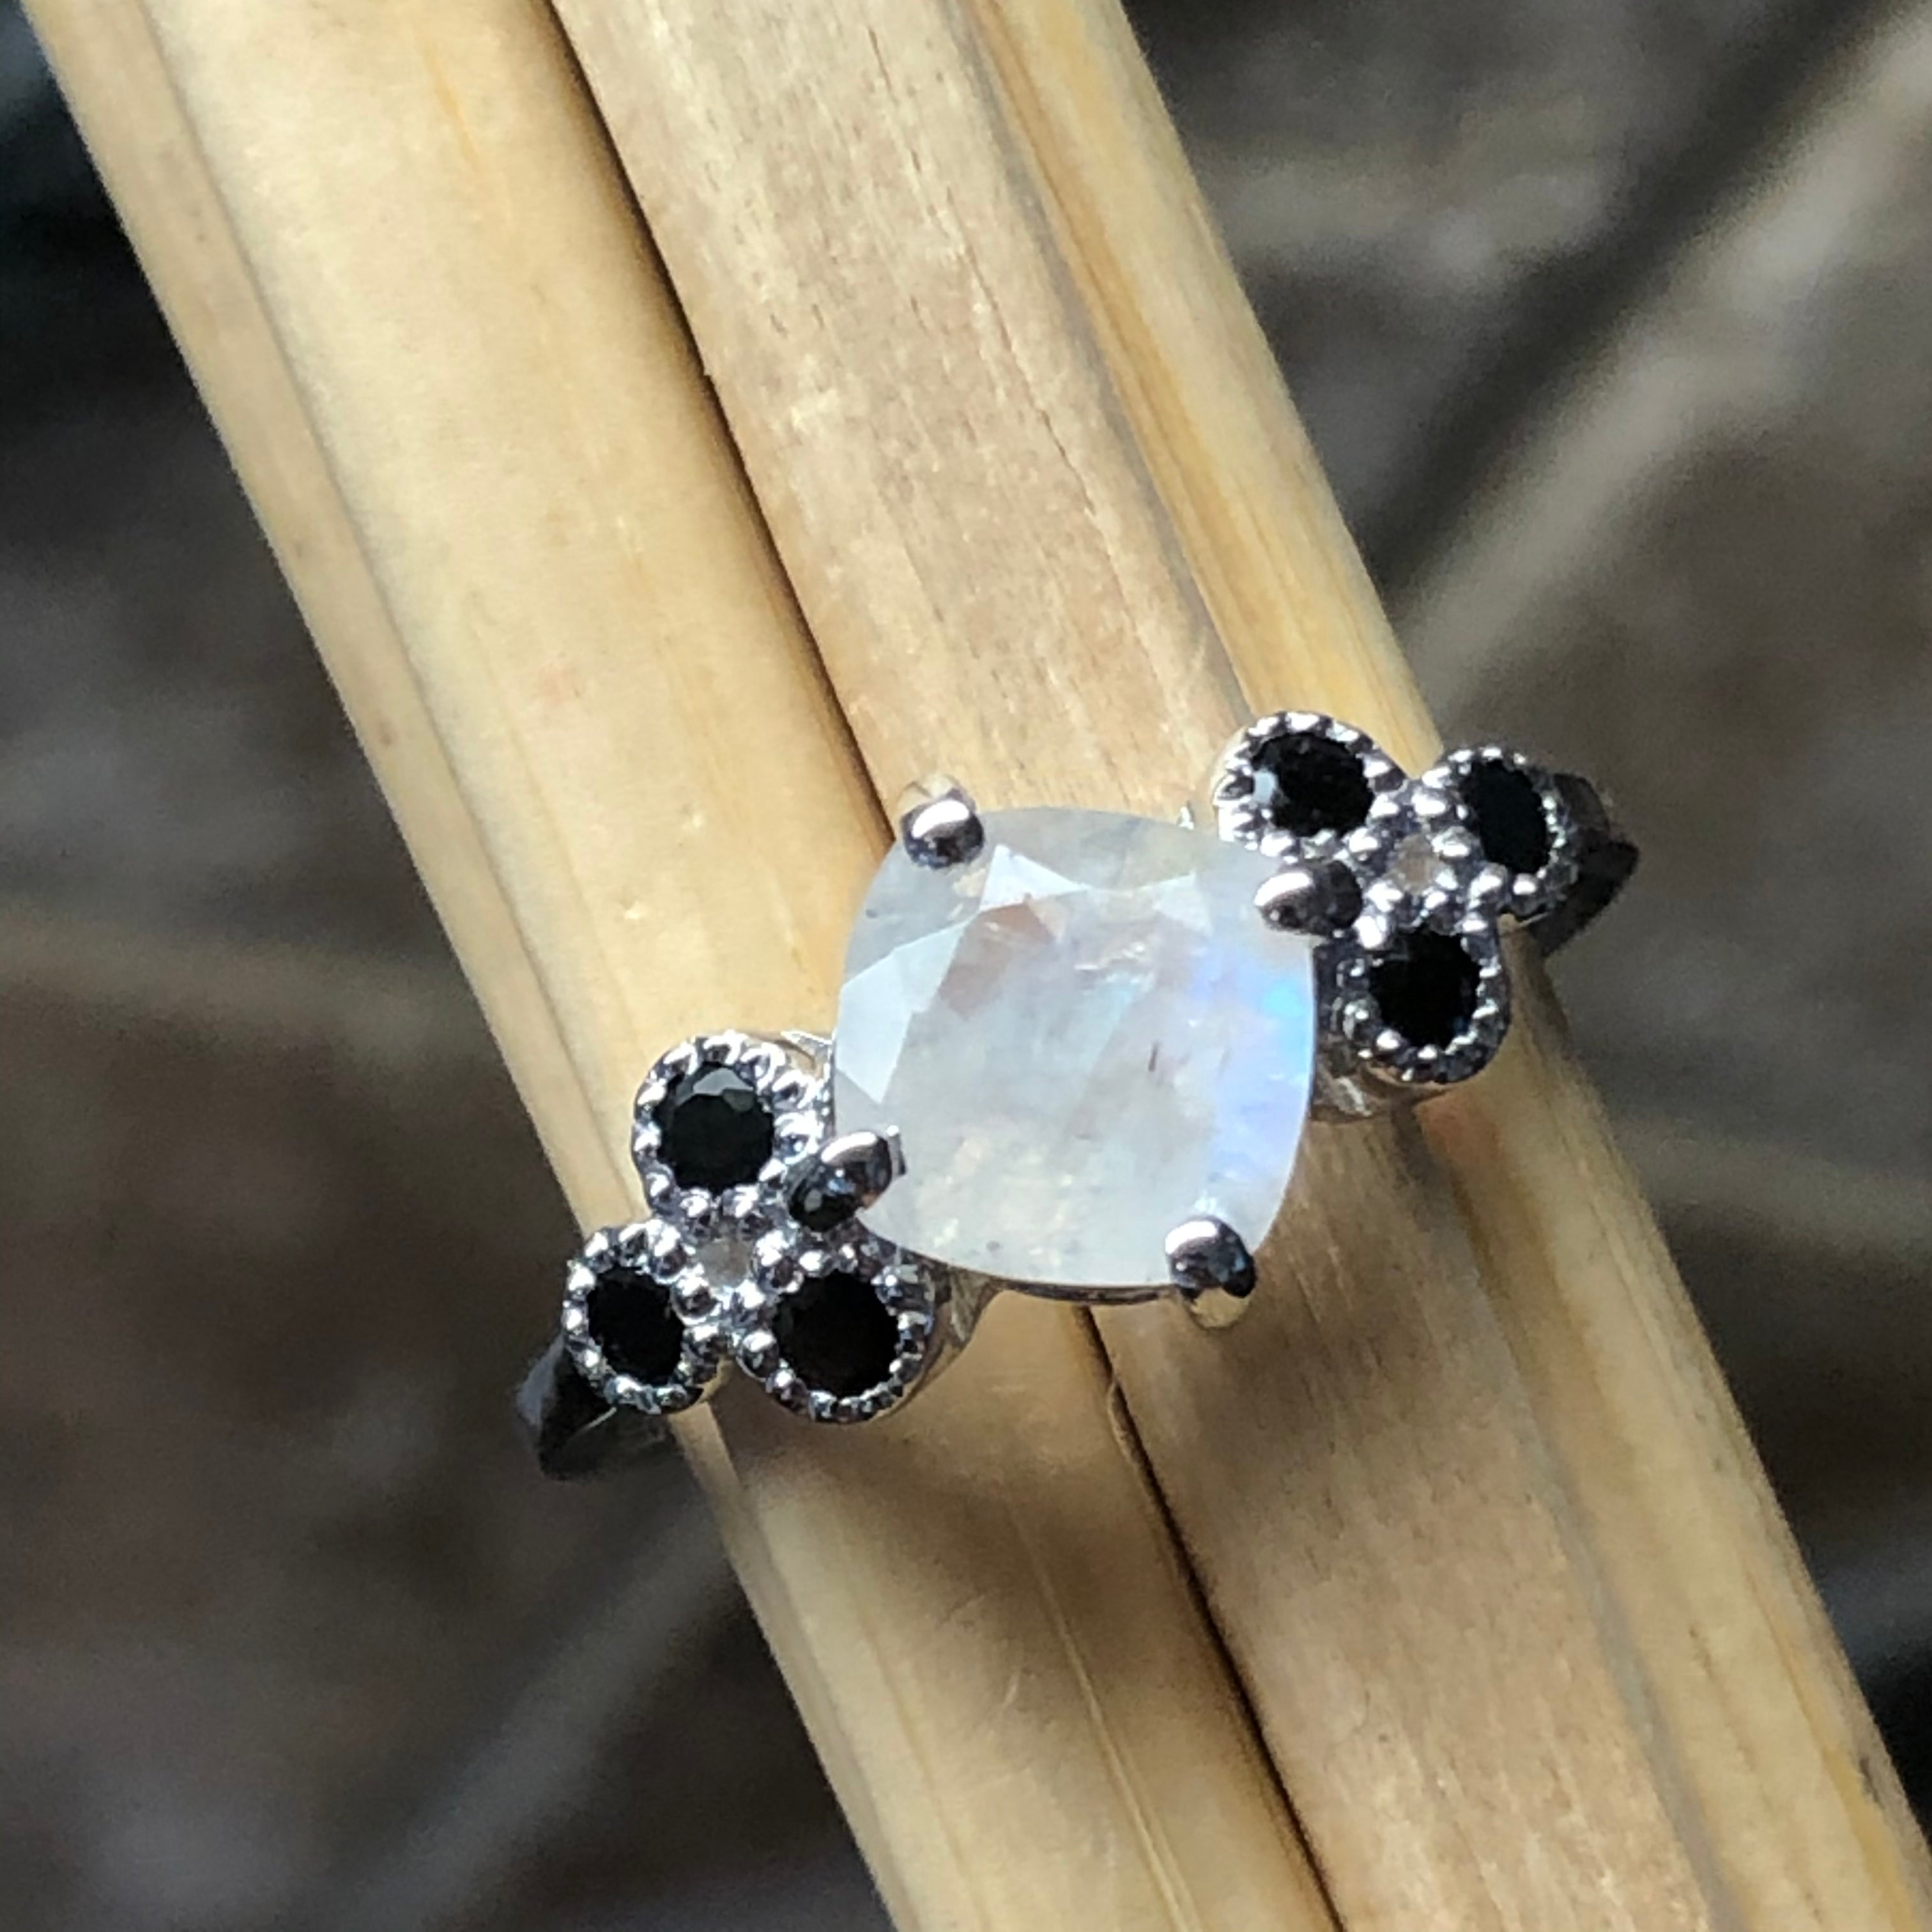 Natural 1ct Iolite, Rainbow Moonstone 925 Solid Sterling Silver Engagement Ring Size 6, 7, 8, 9 - Natural Rocks by Kala